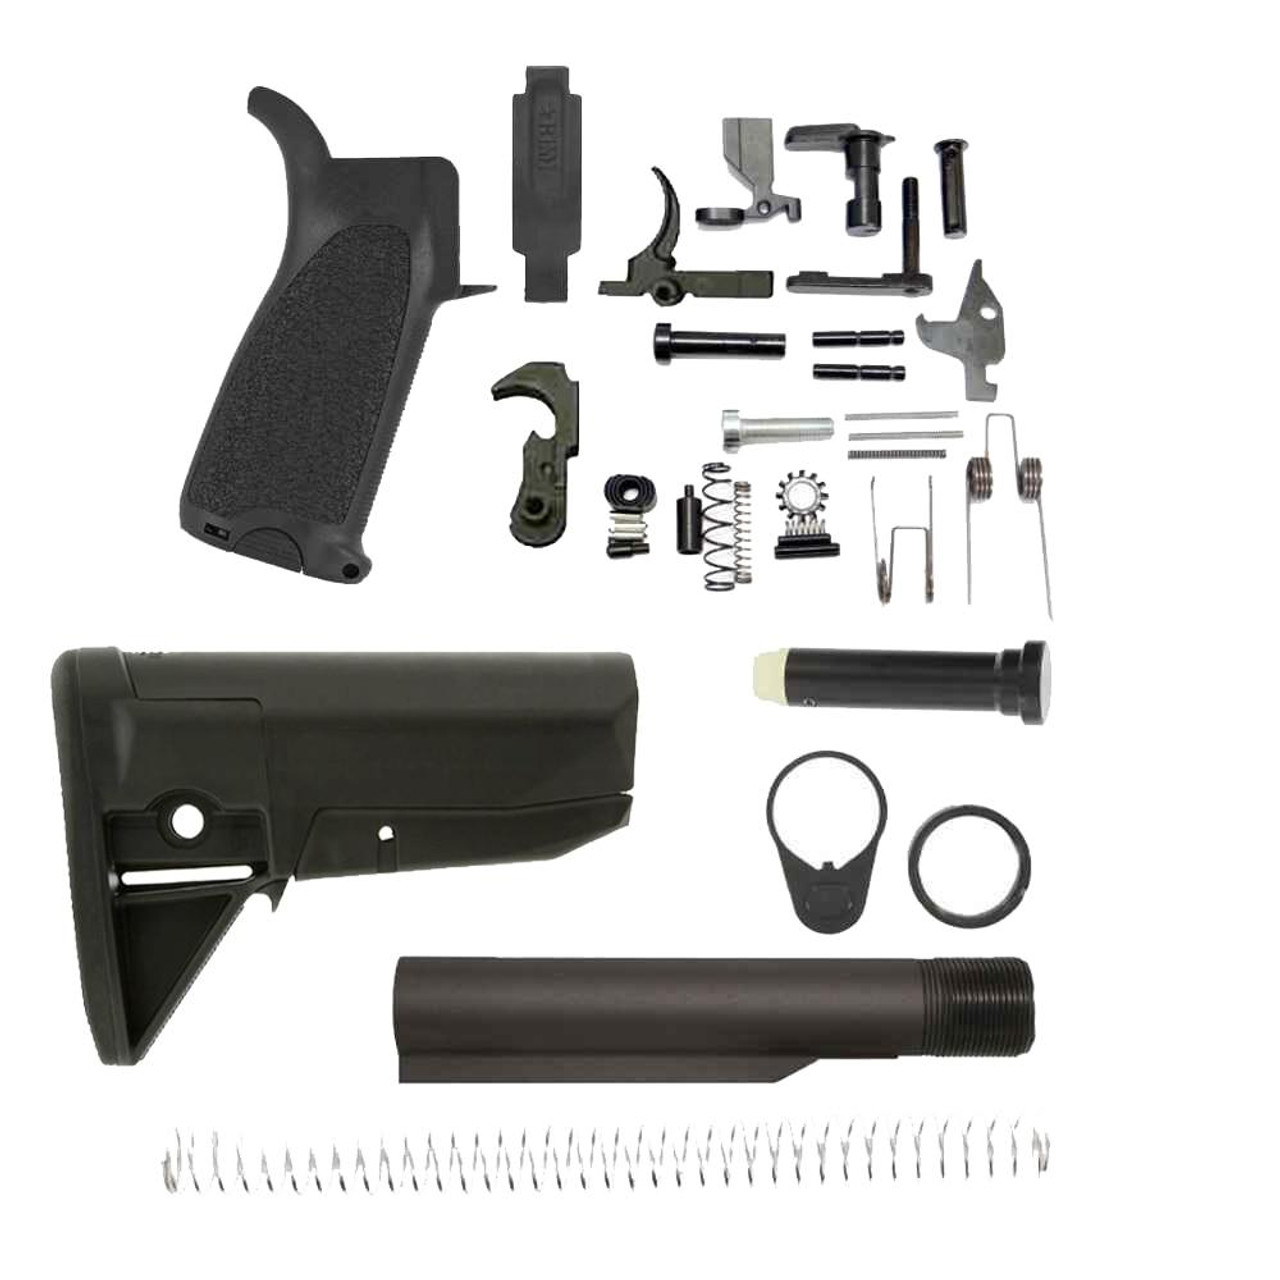 mgunfighter Mod 0 Ar 15 Lower Build Kit Quick Shipping